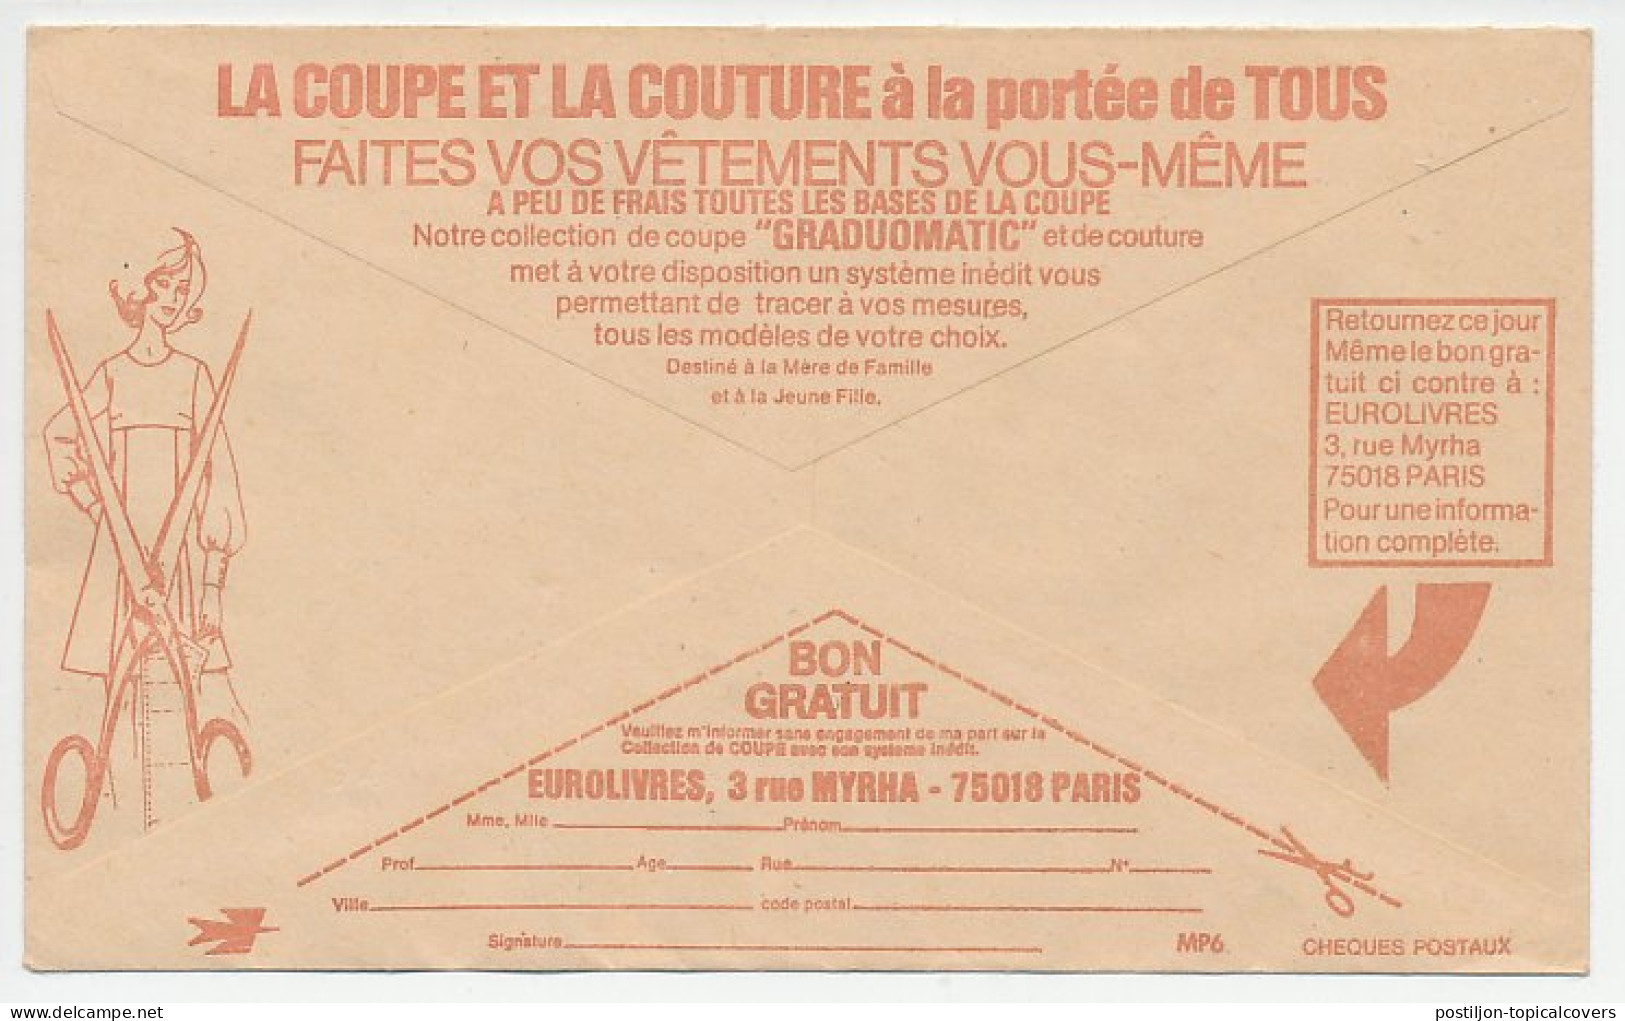 Postal Cheque Cover France Clothing Patterns - Scissors - Kostums